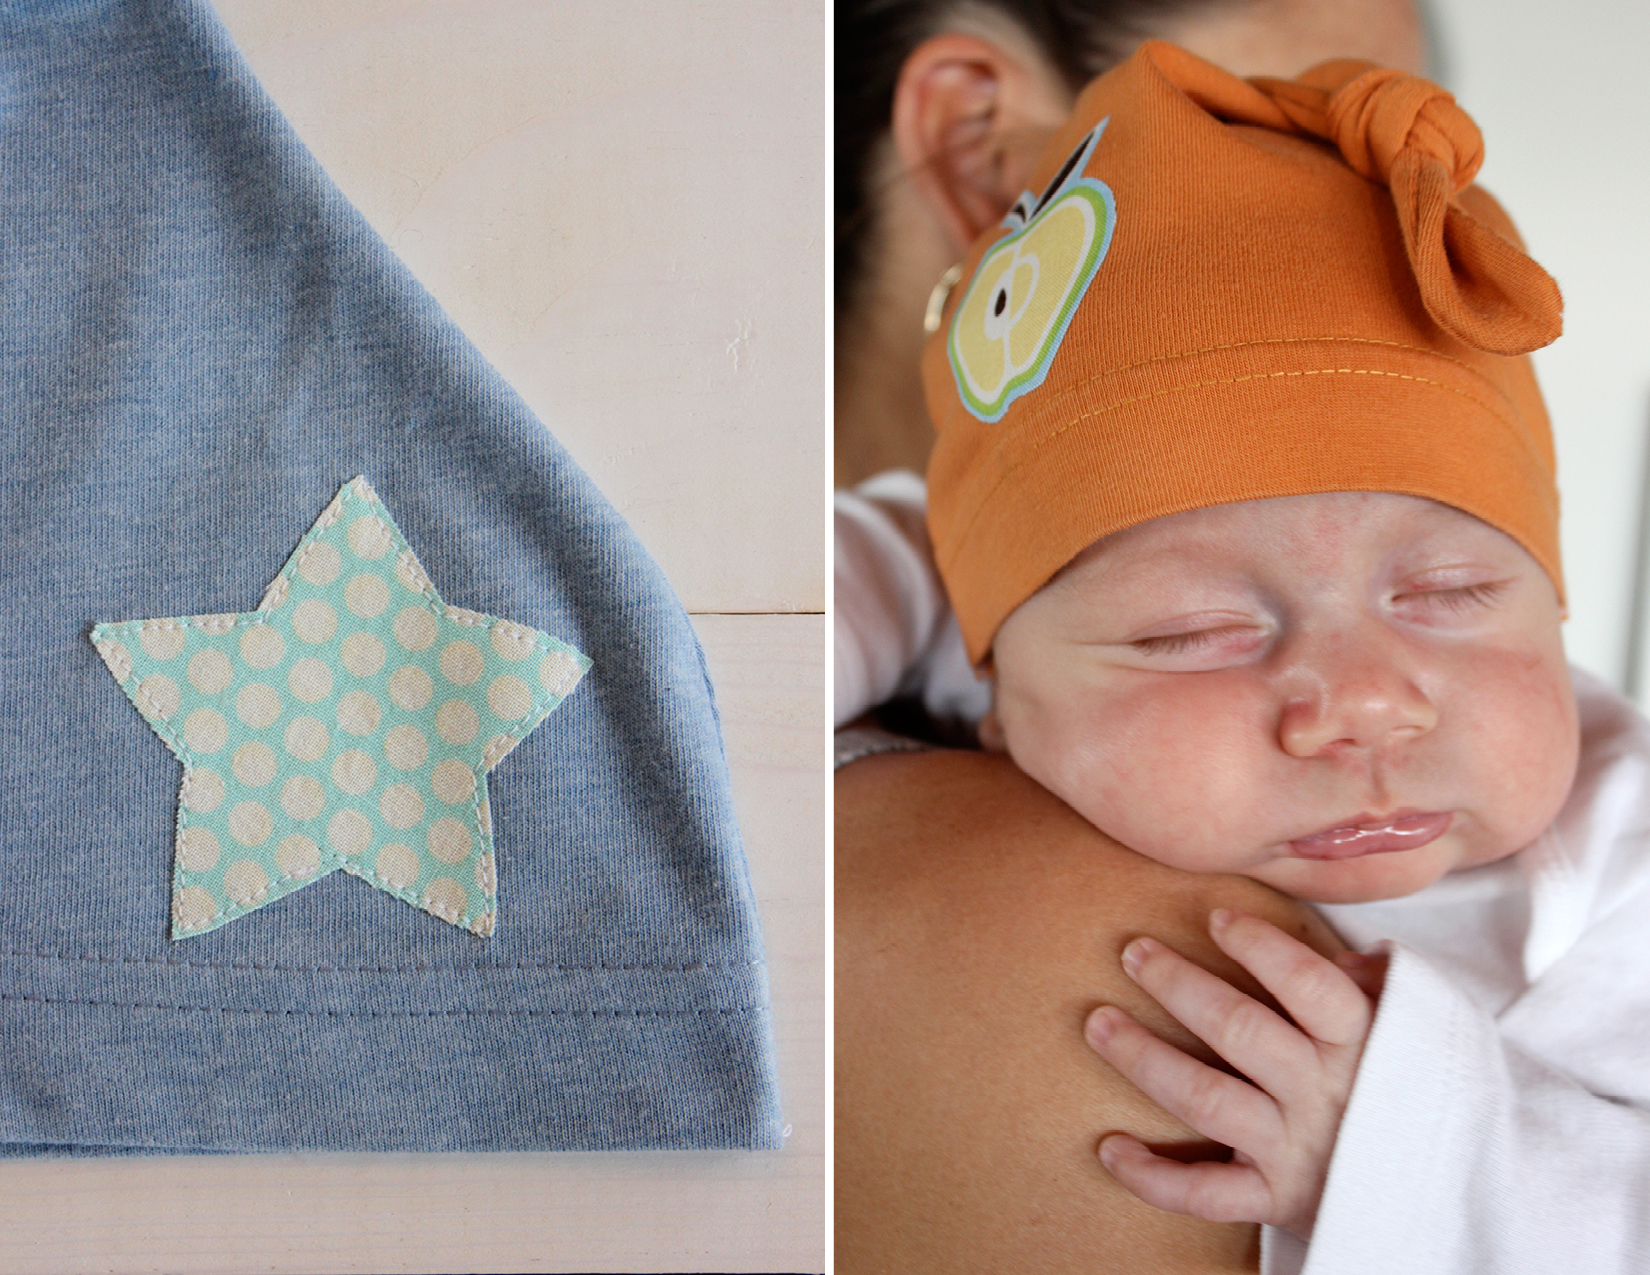 DIY tutorial for upcycled knotted baby hats on aliceandlois.com